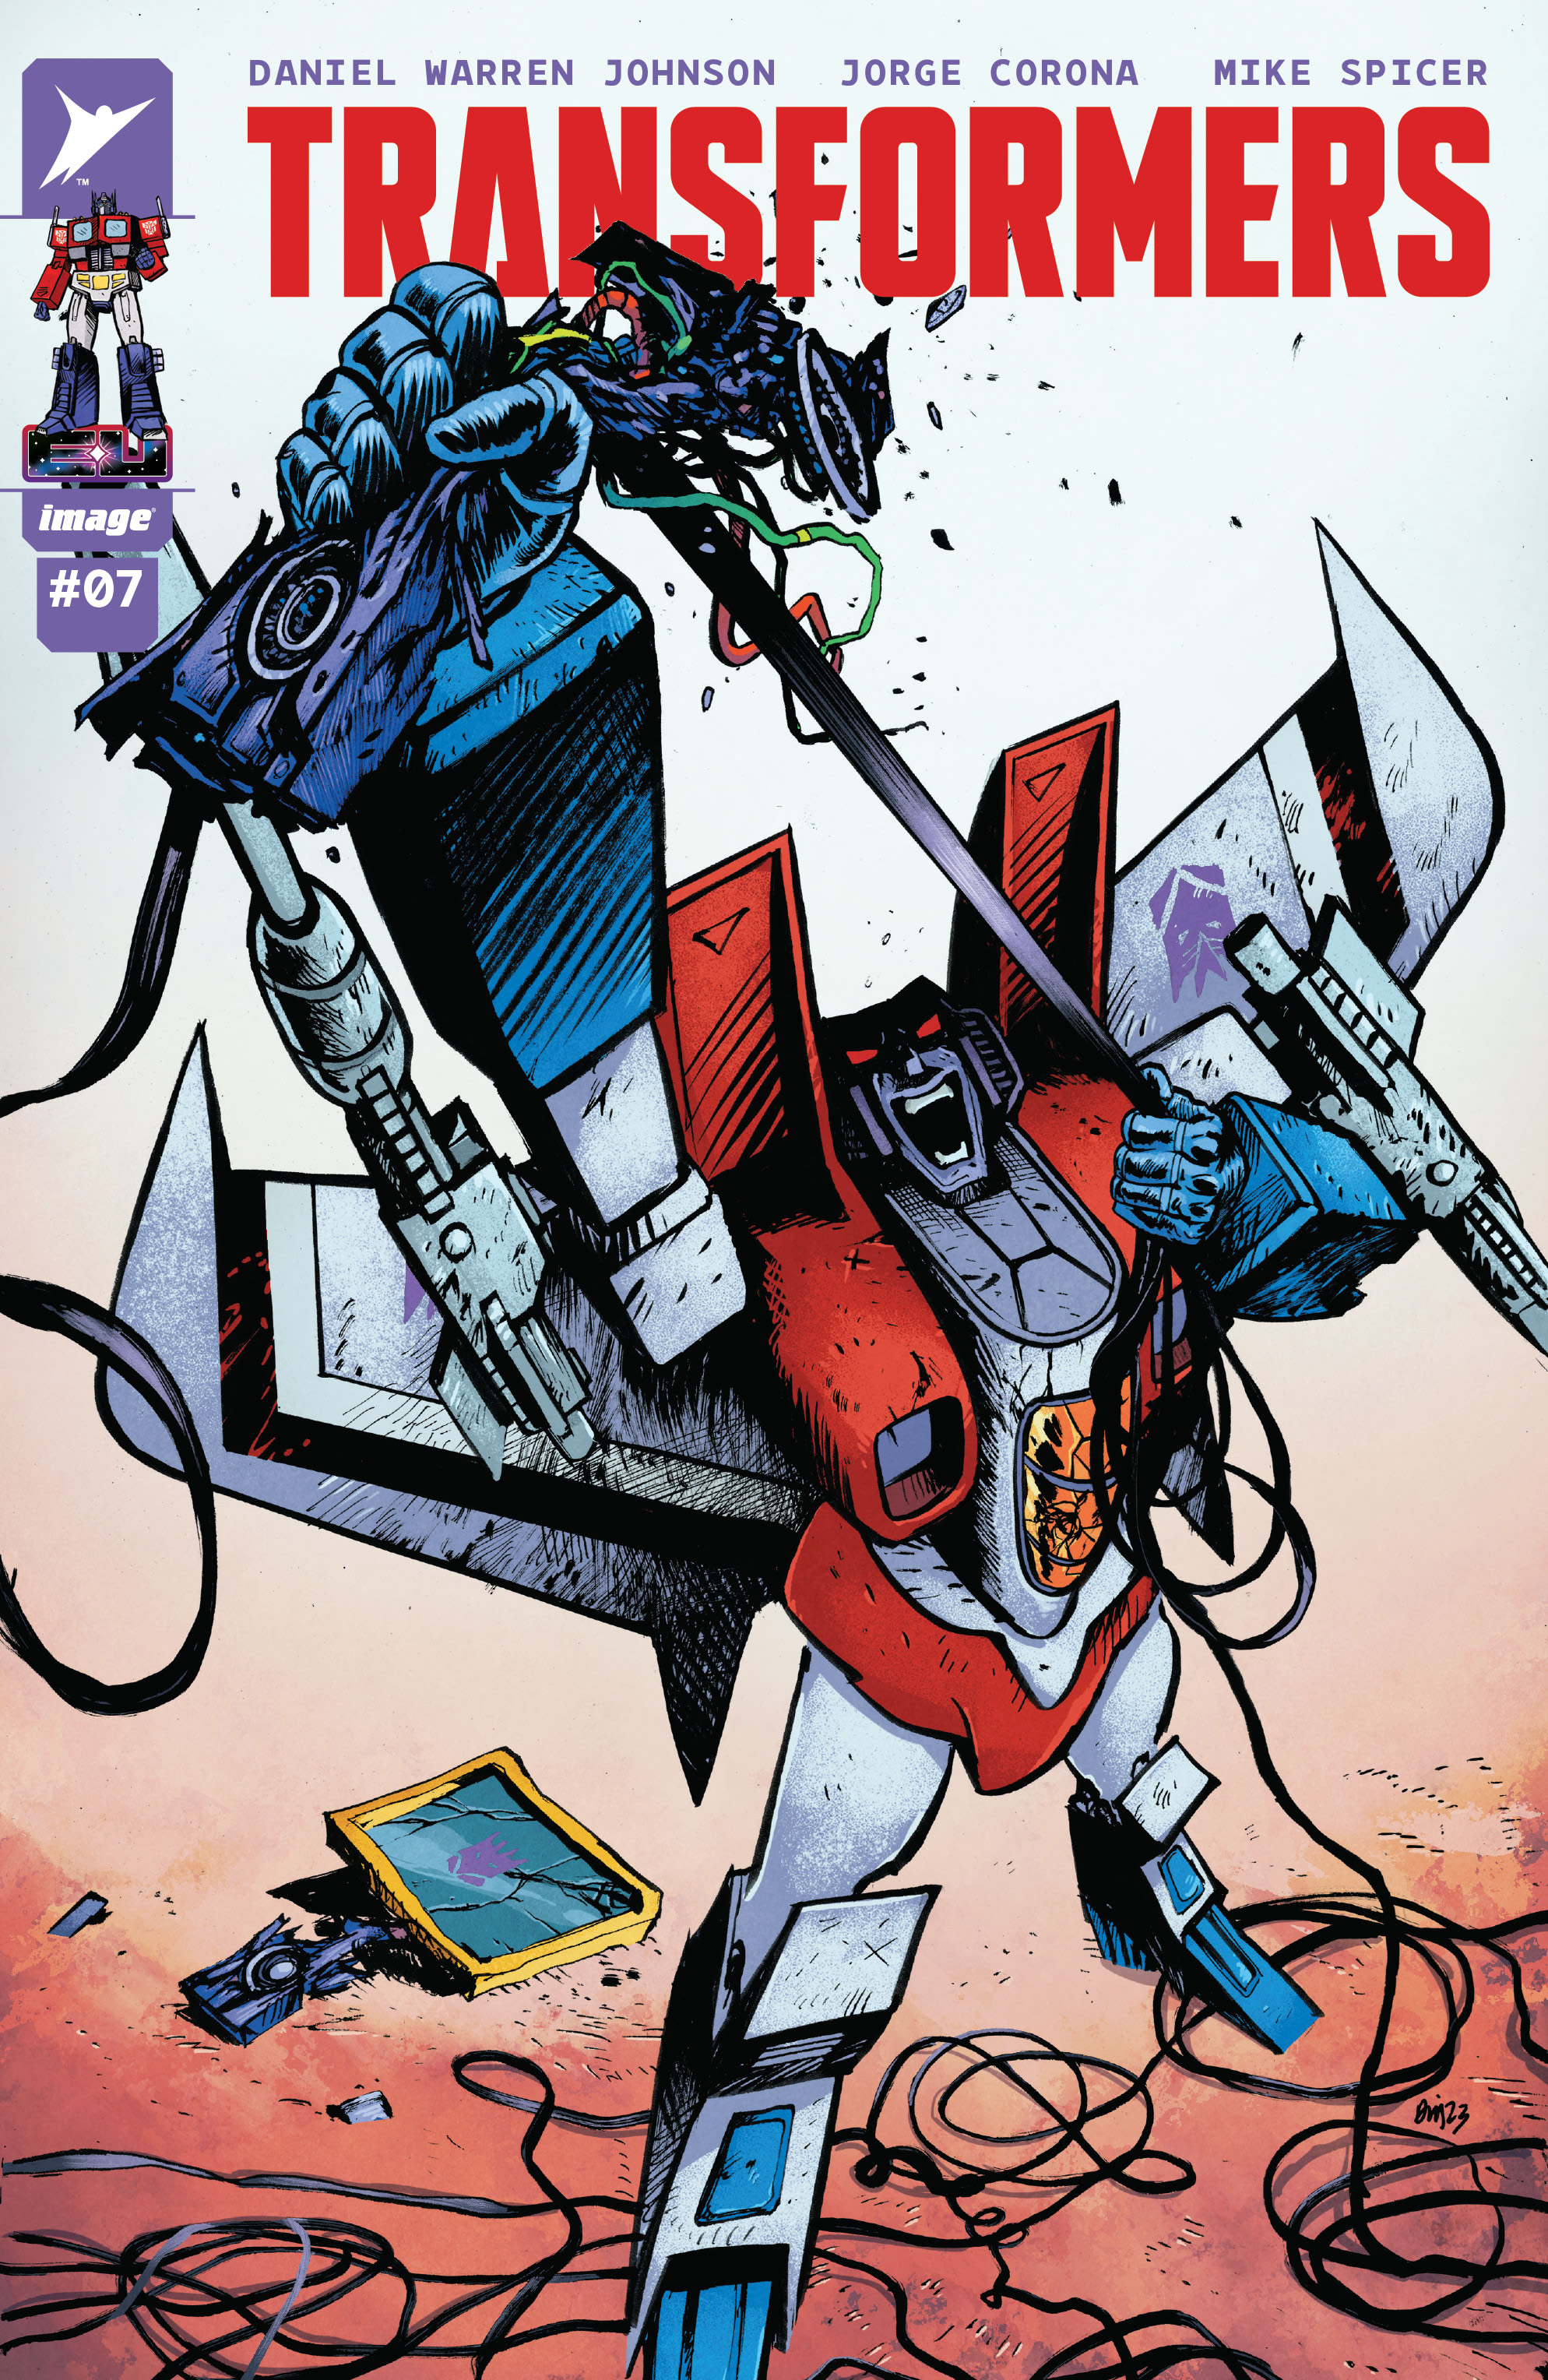 Cover art from Transformers #7